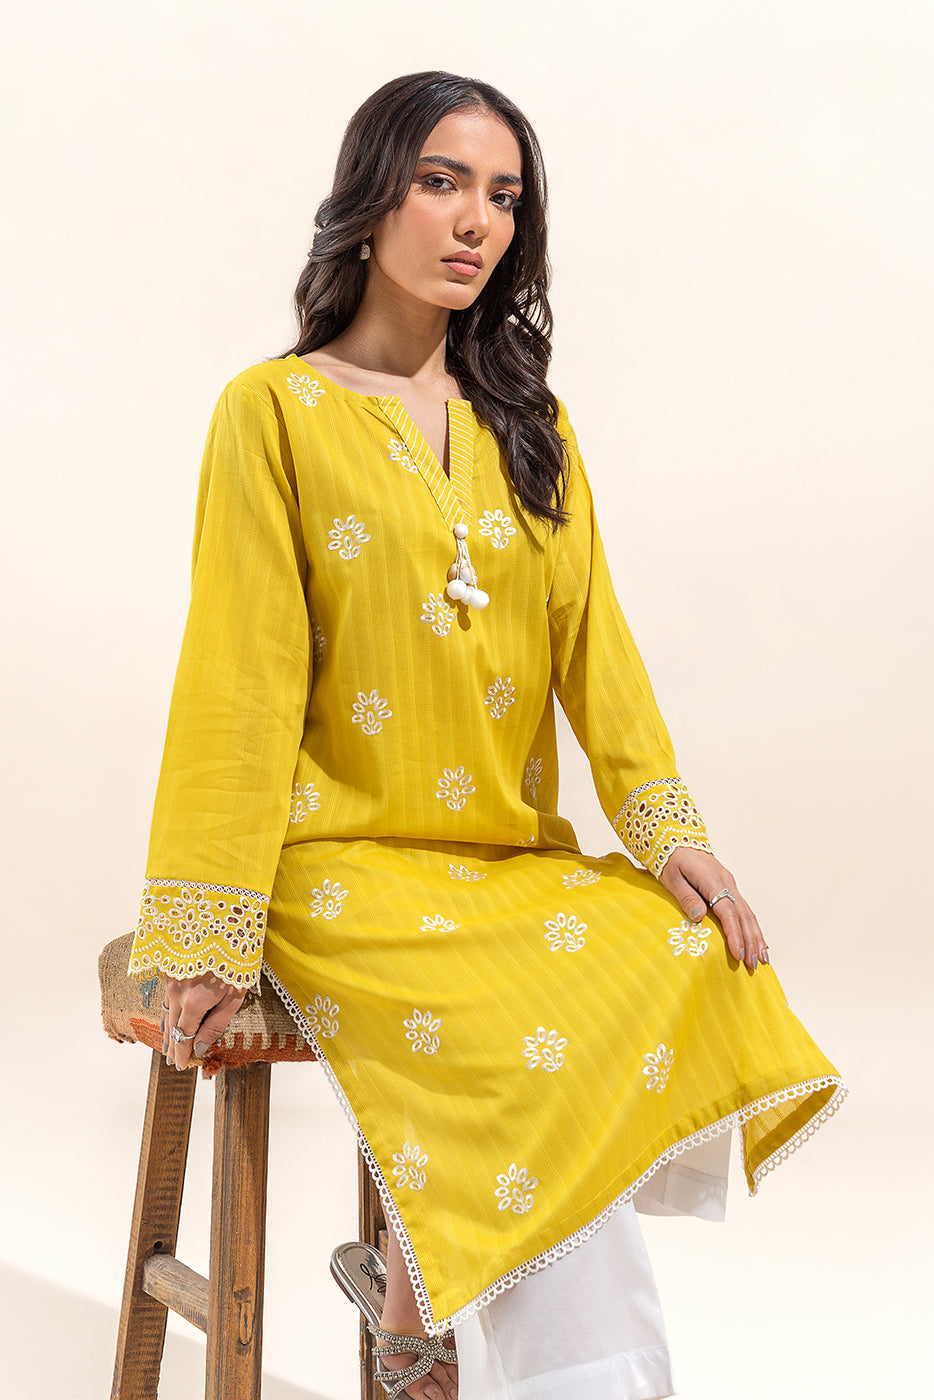 1 PIECE EMBROIDERED LENO KARRA SHIRT-MISTED YELLOW (UNSTITCHED) - BEECHTREE